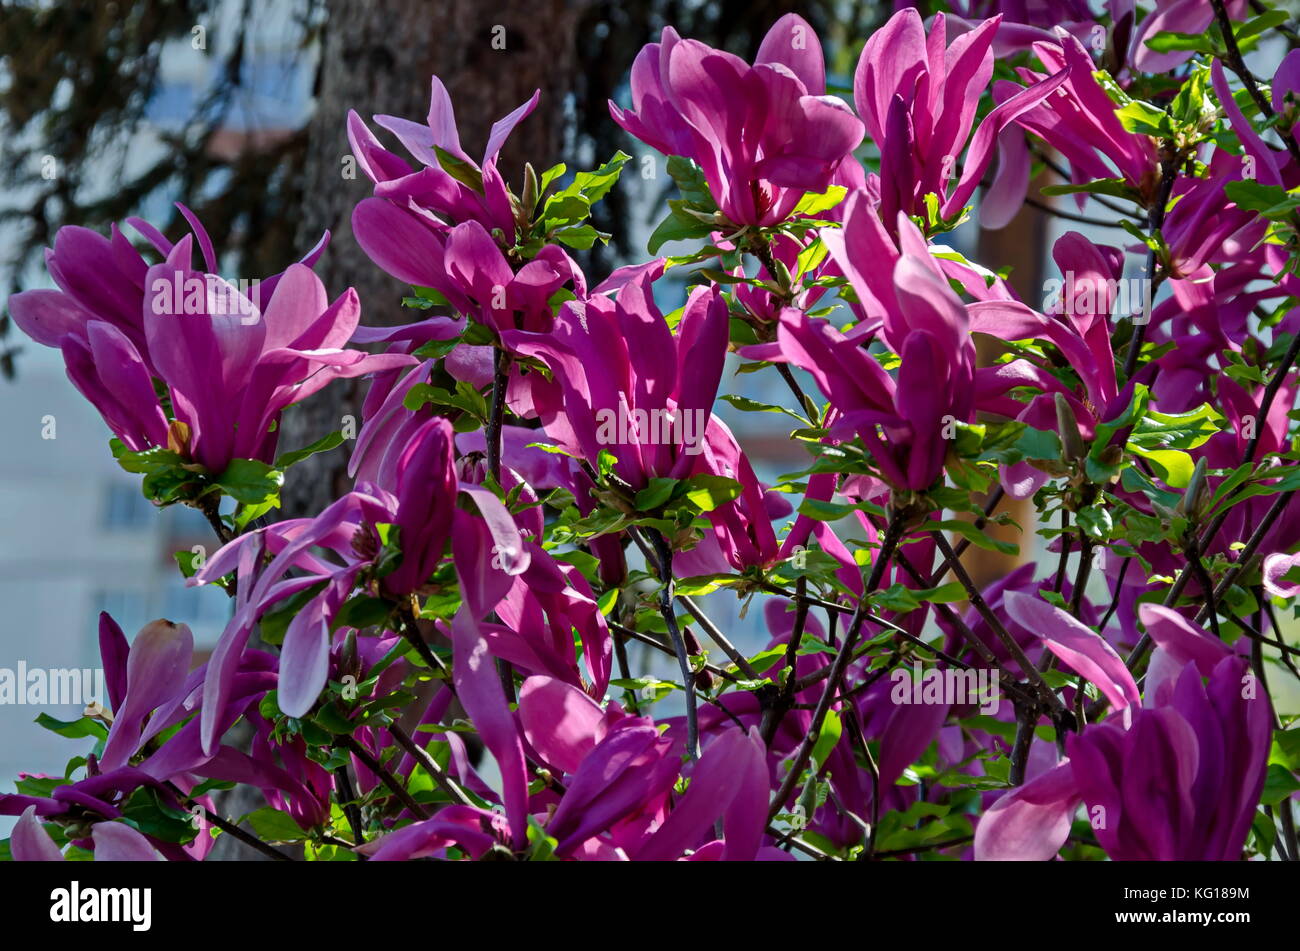 Twig with purple bloom and leaves of magnolia tree at springtime in garden, Sofia, Bulgaria Stock Photo